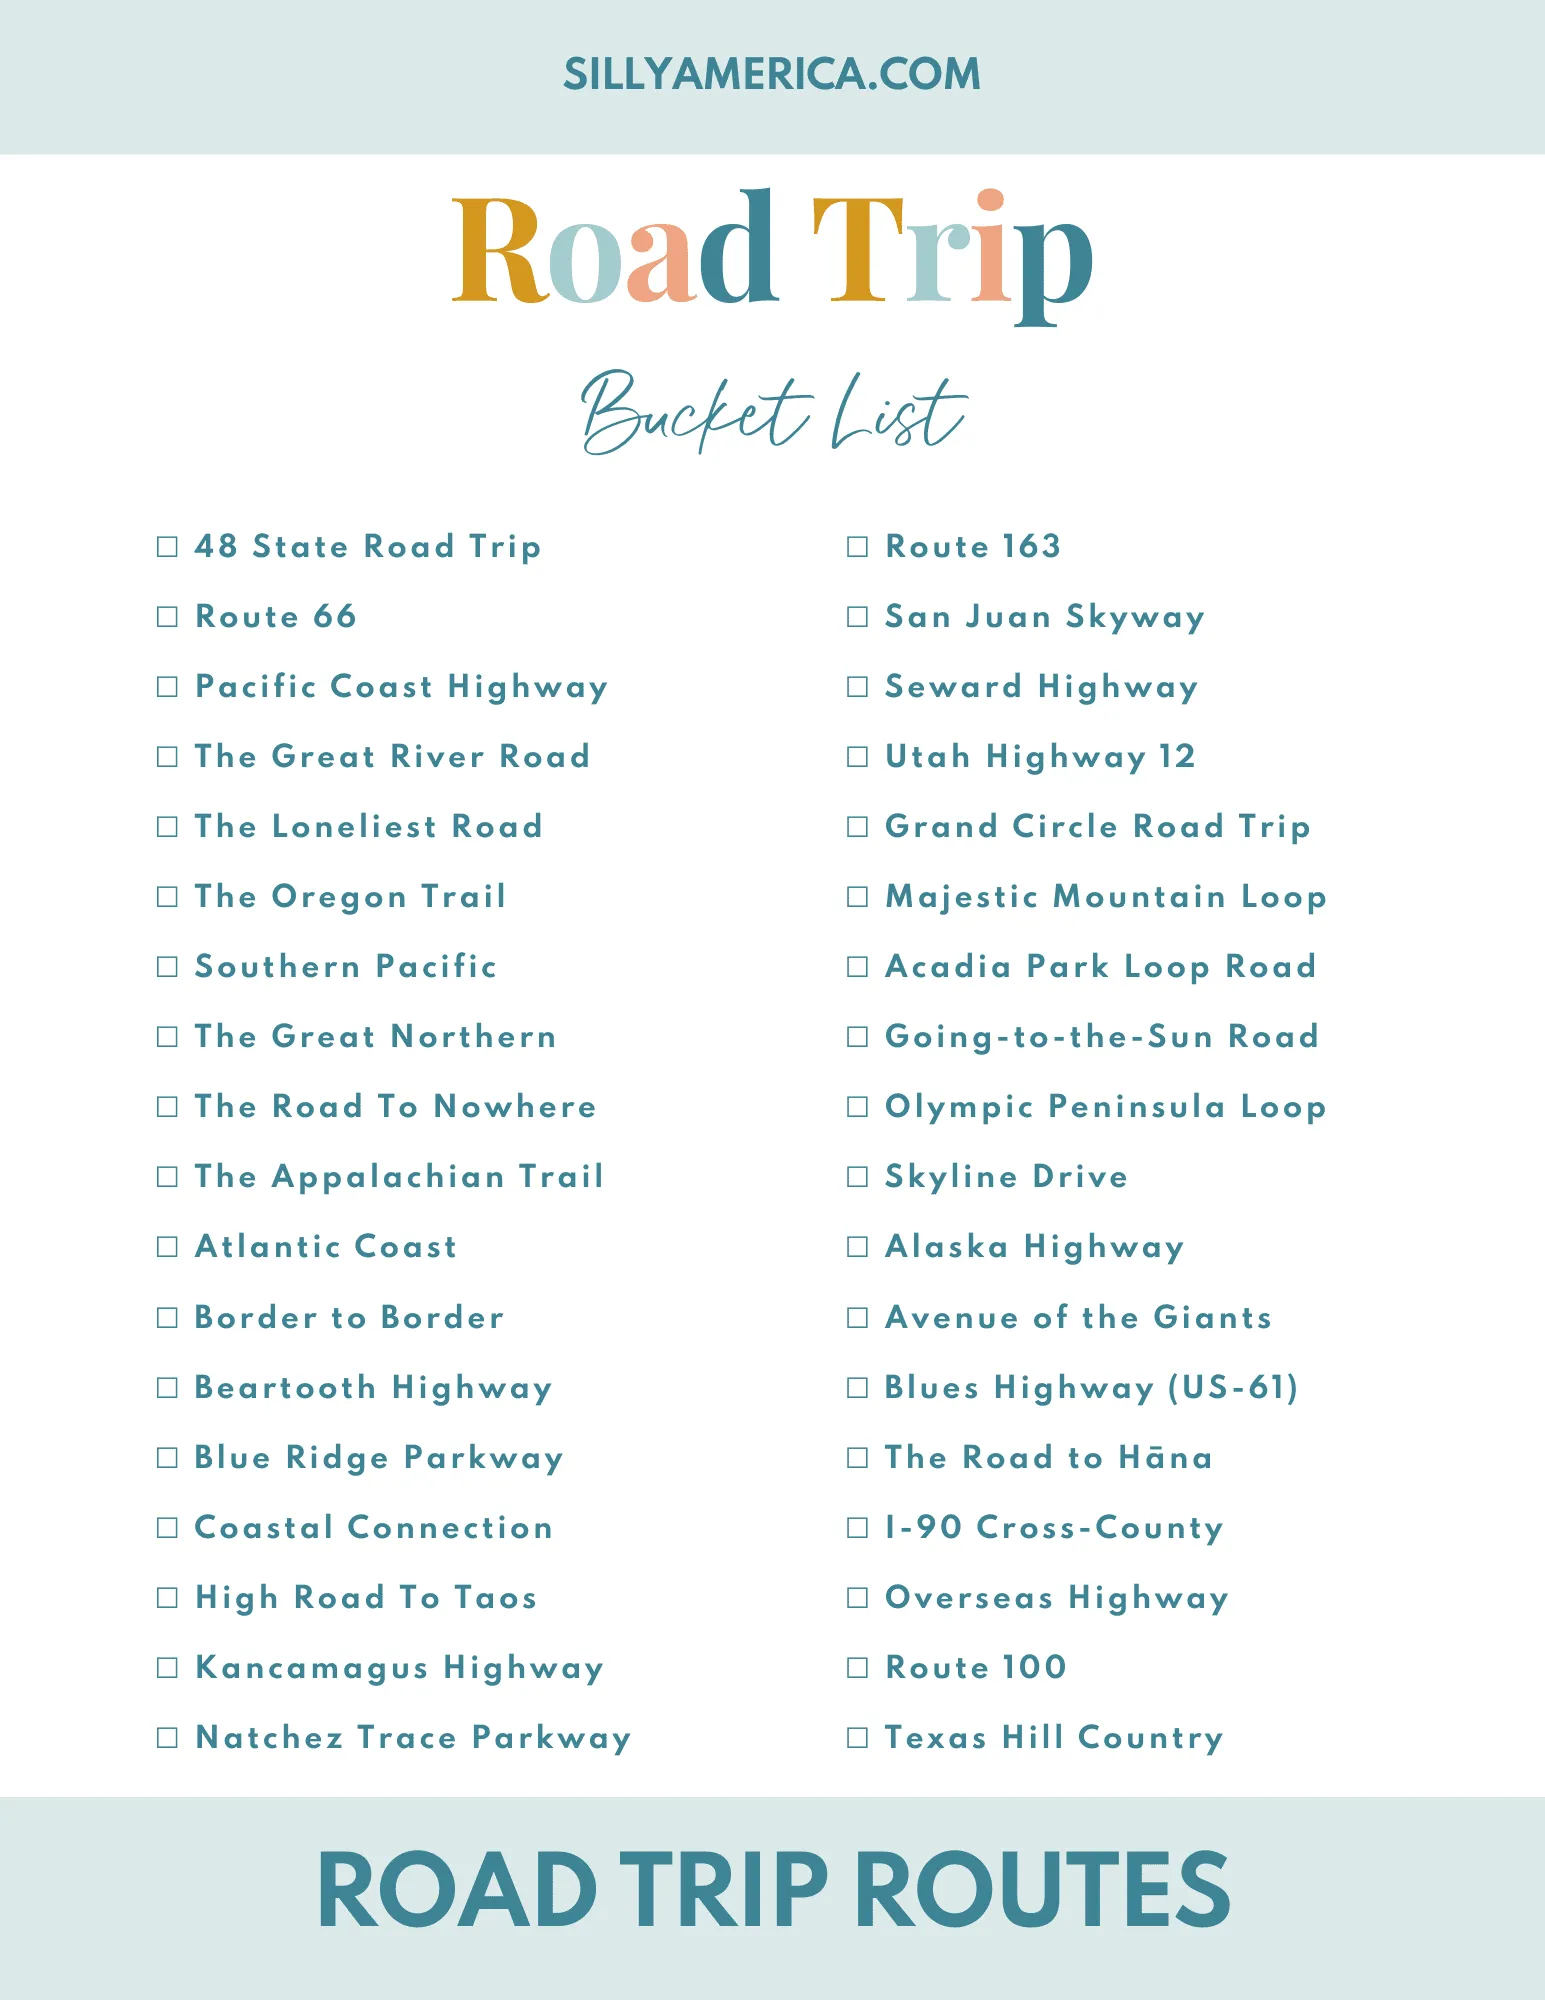 Bucket List Road Trip Routes - iconic drives and roads to add to your travel bucket list